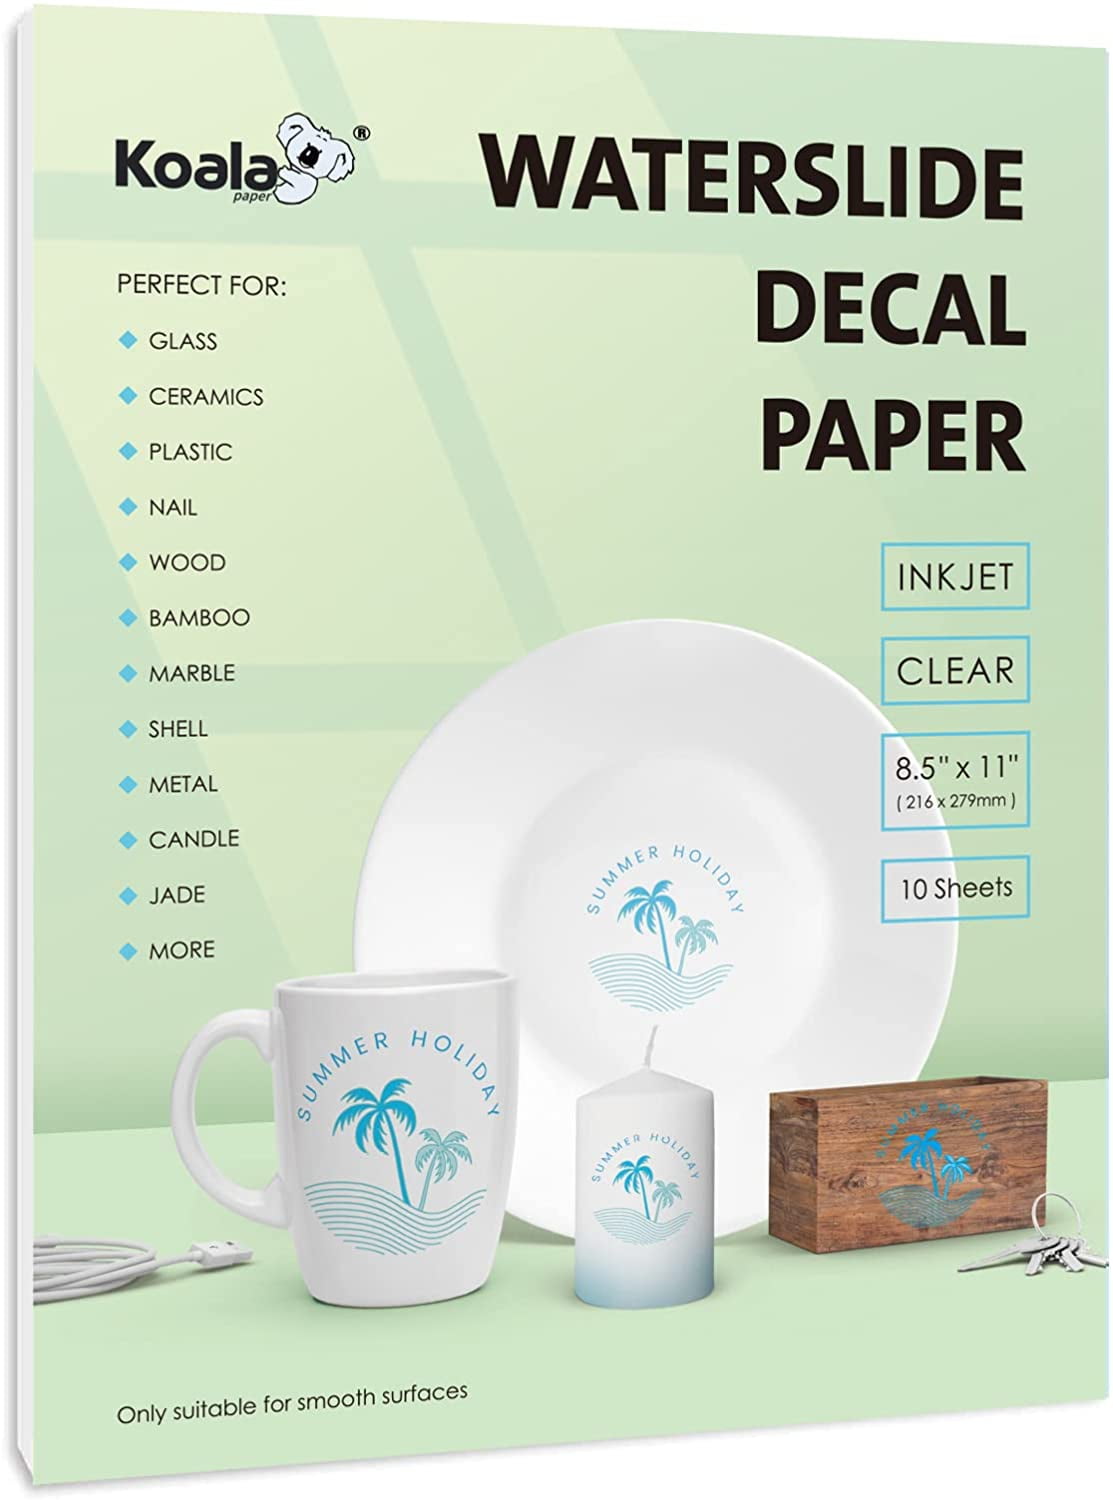 HTVRONT Sublimation Transfer Paper-A3/A4 150 Sheets 120g for Mug  Cup,T-Shirt,DIY